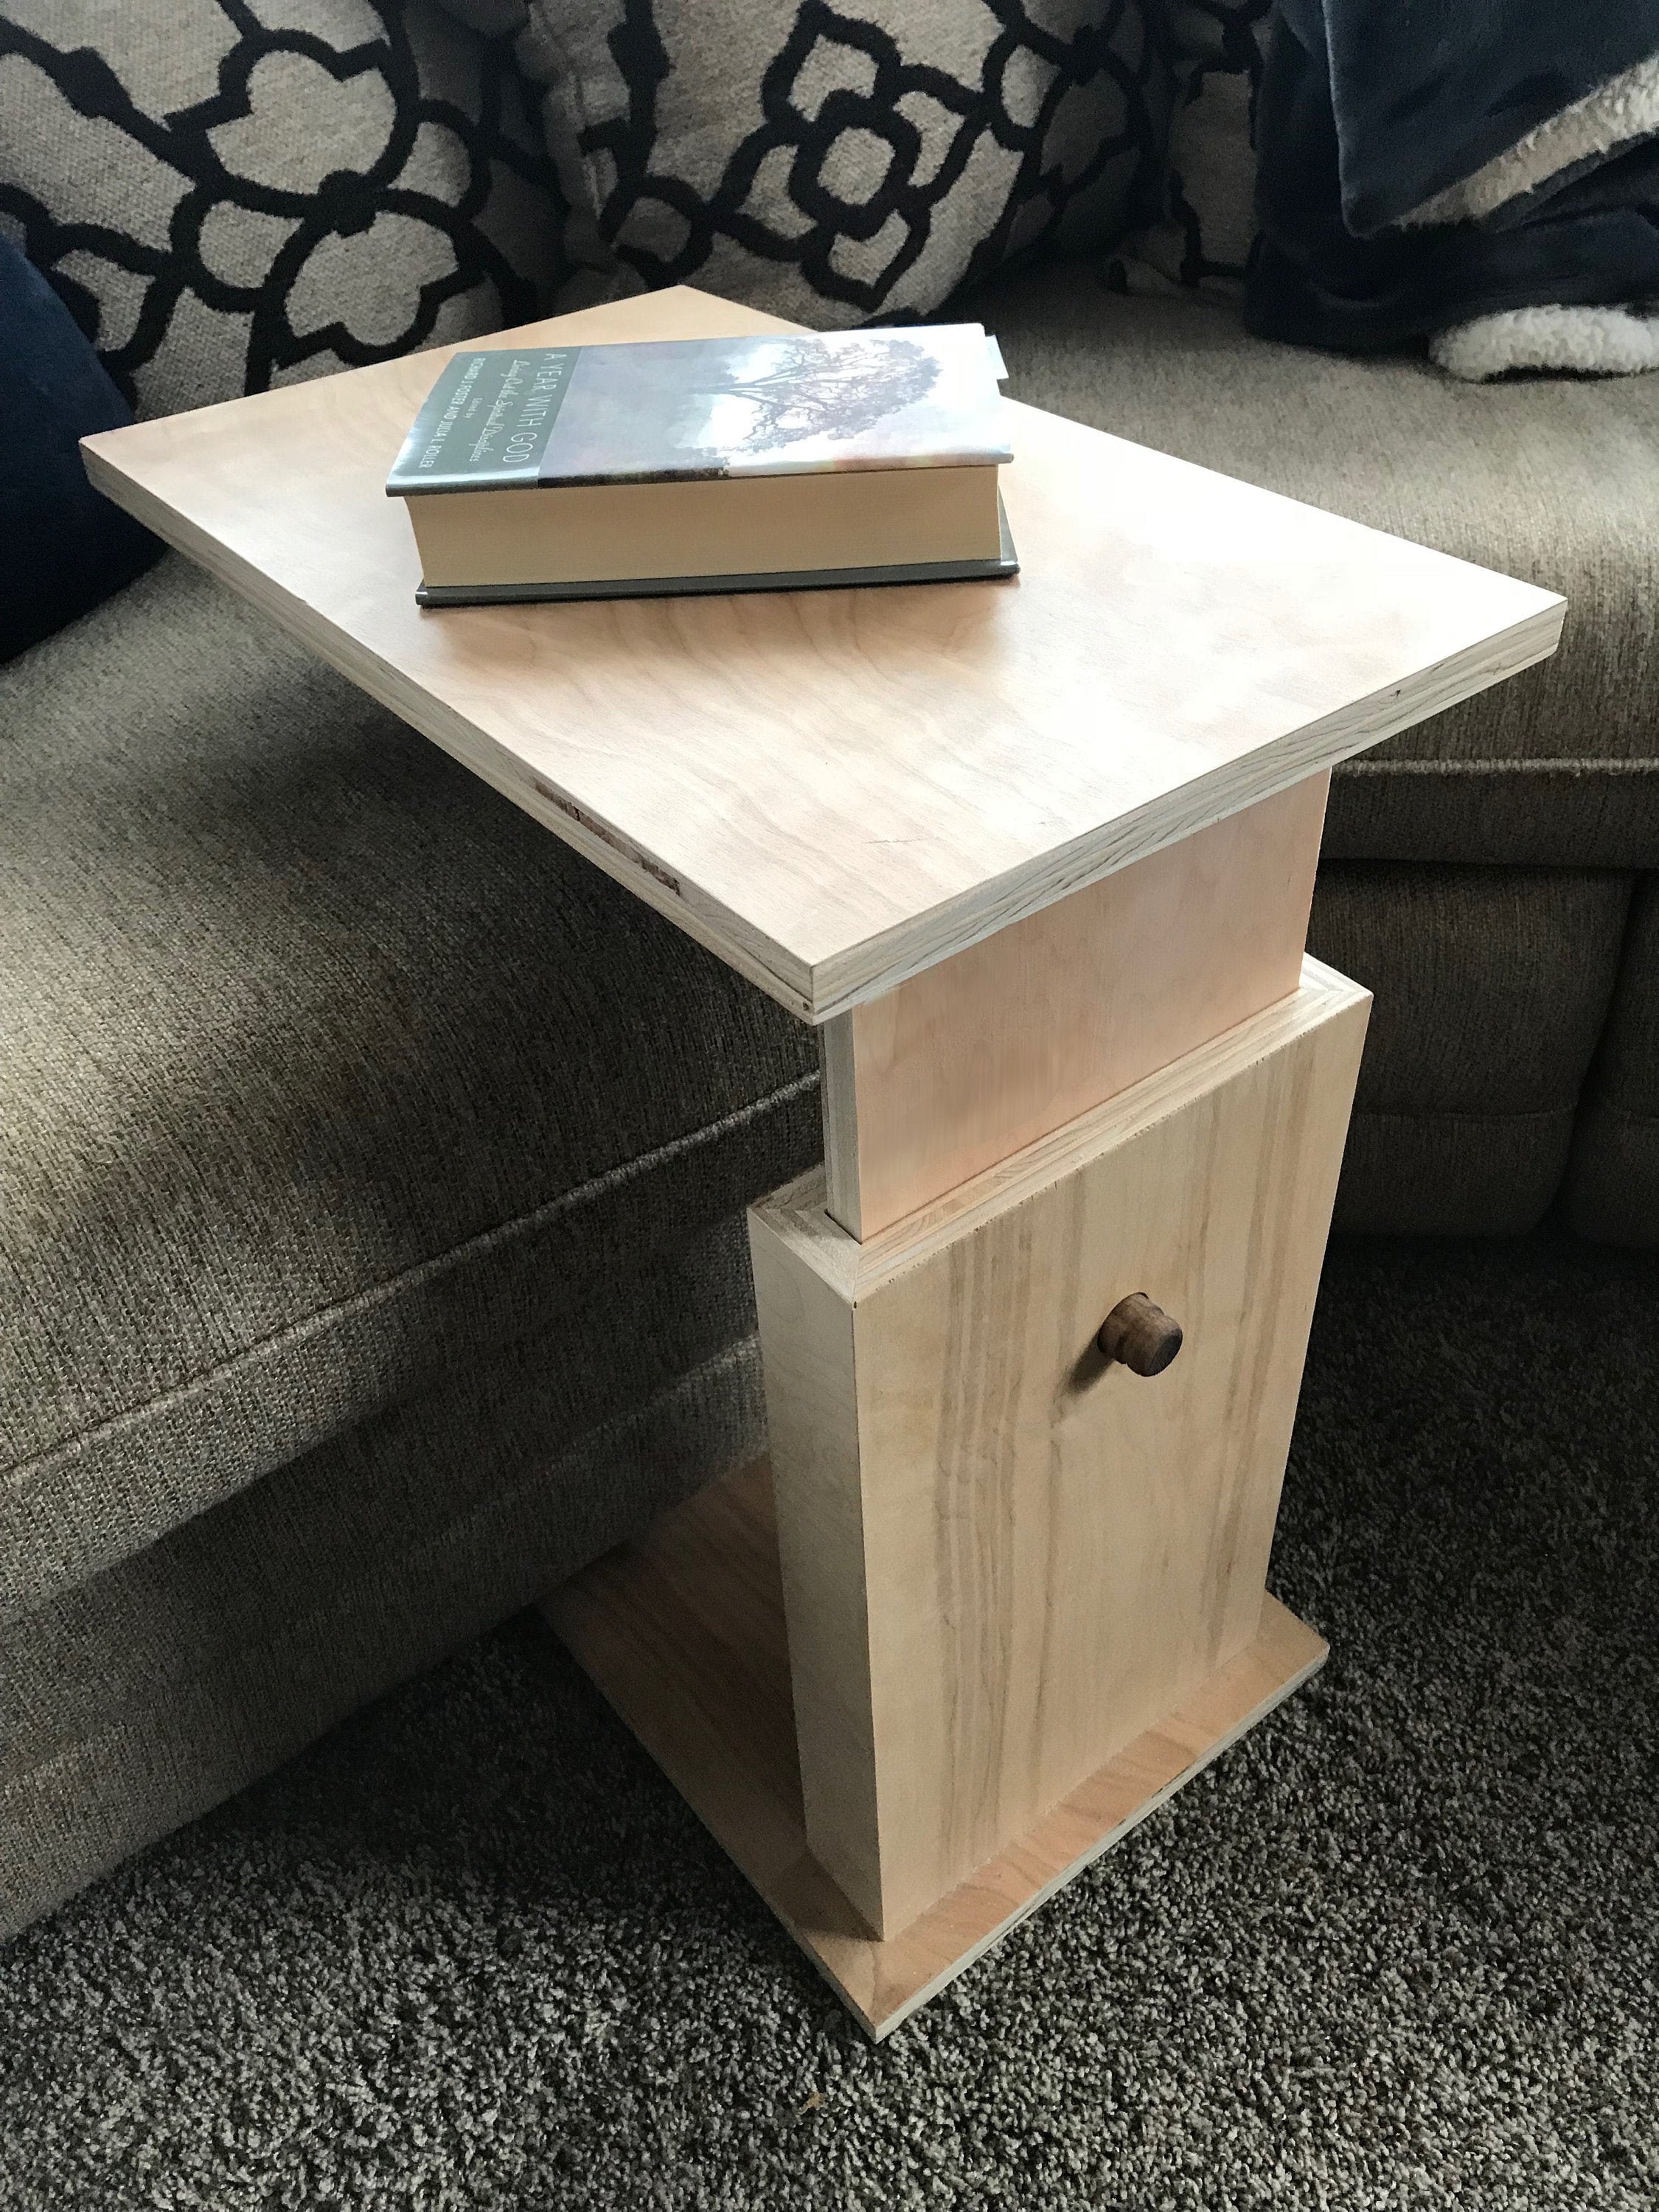 DIY sofa couch / slide in coffee table